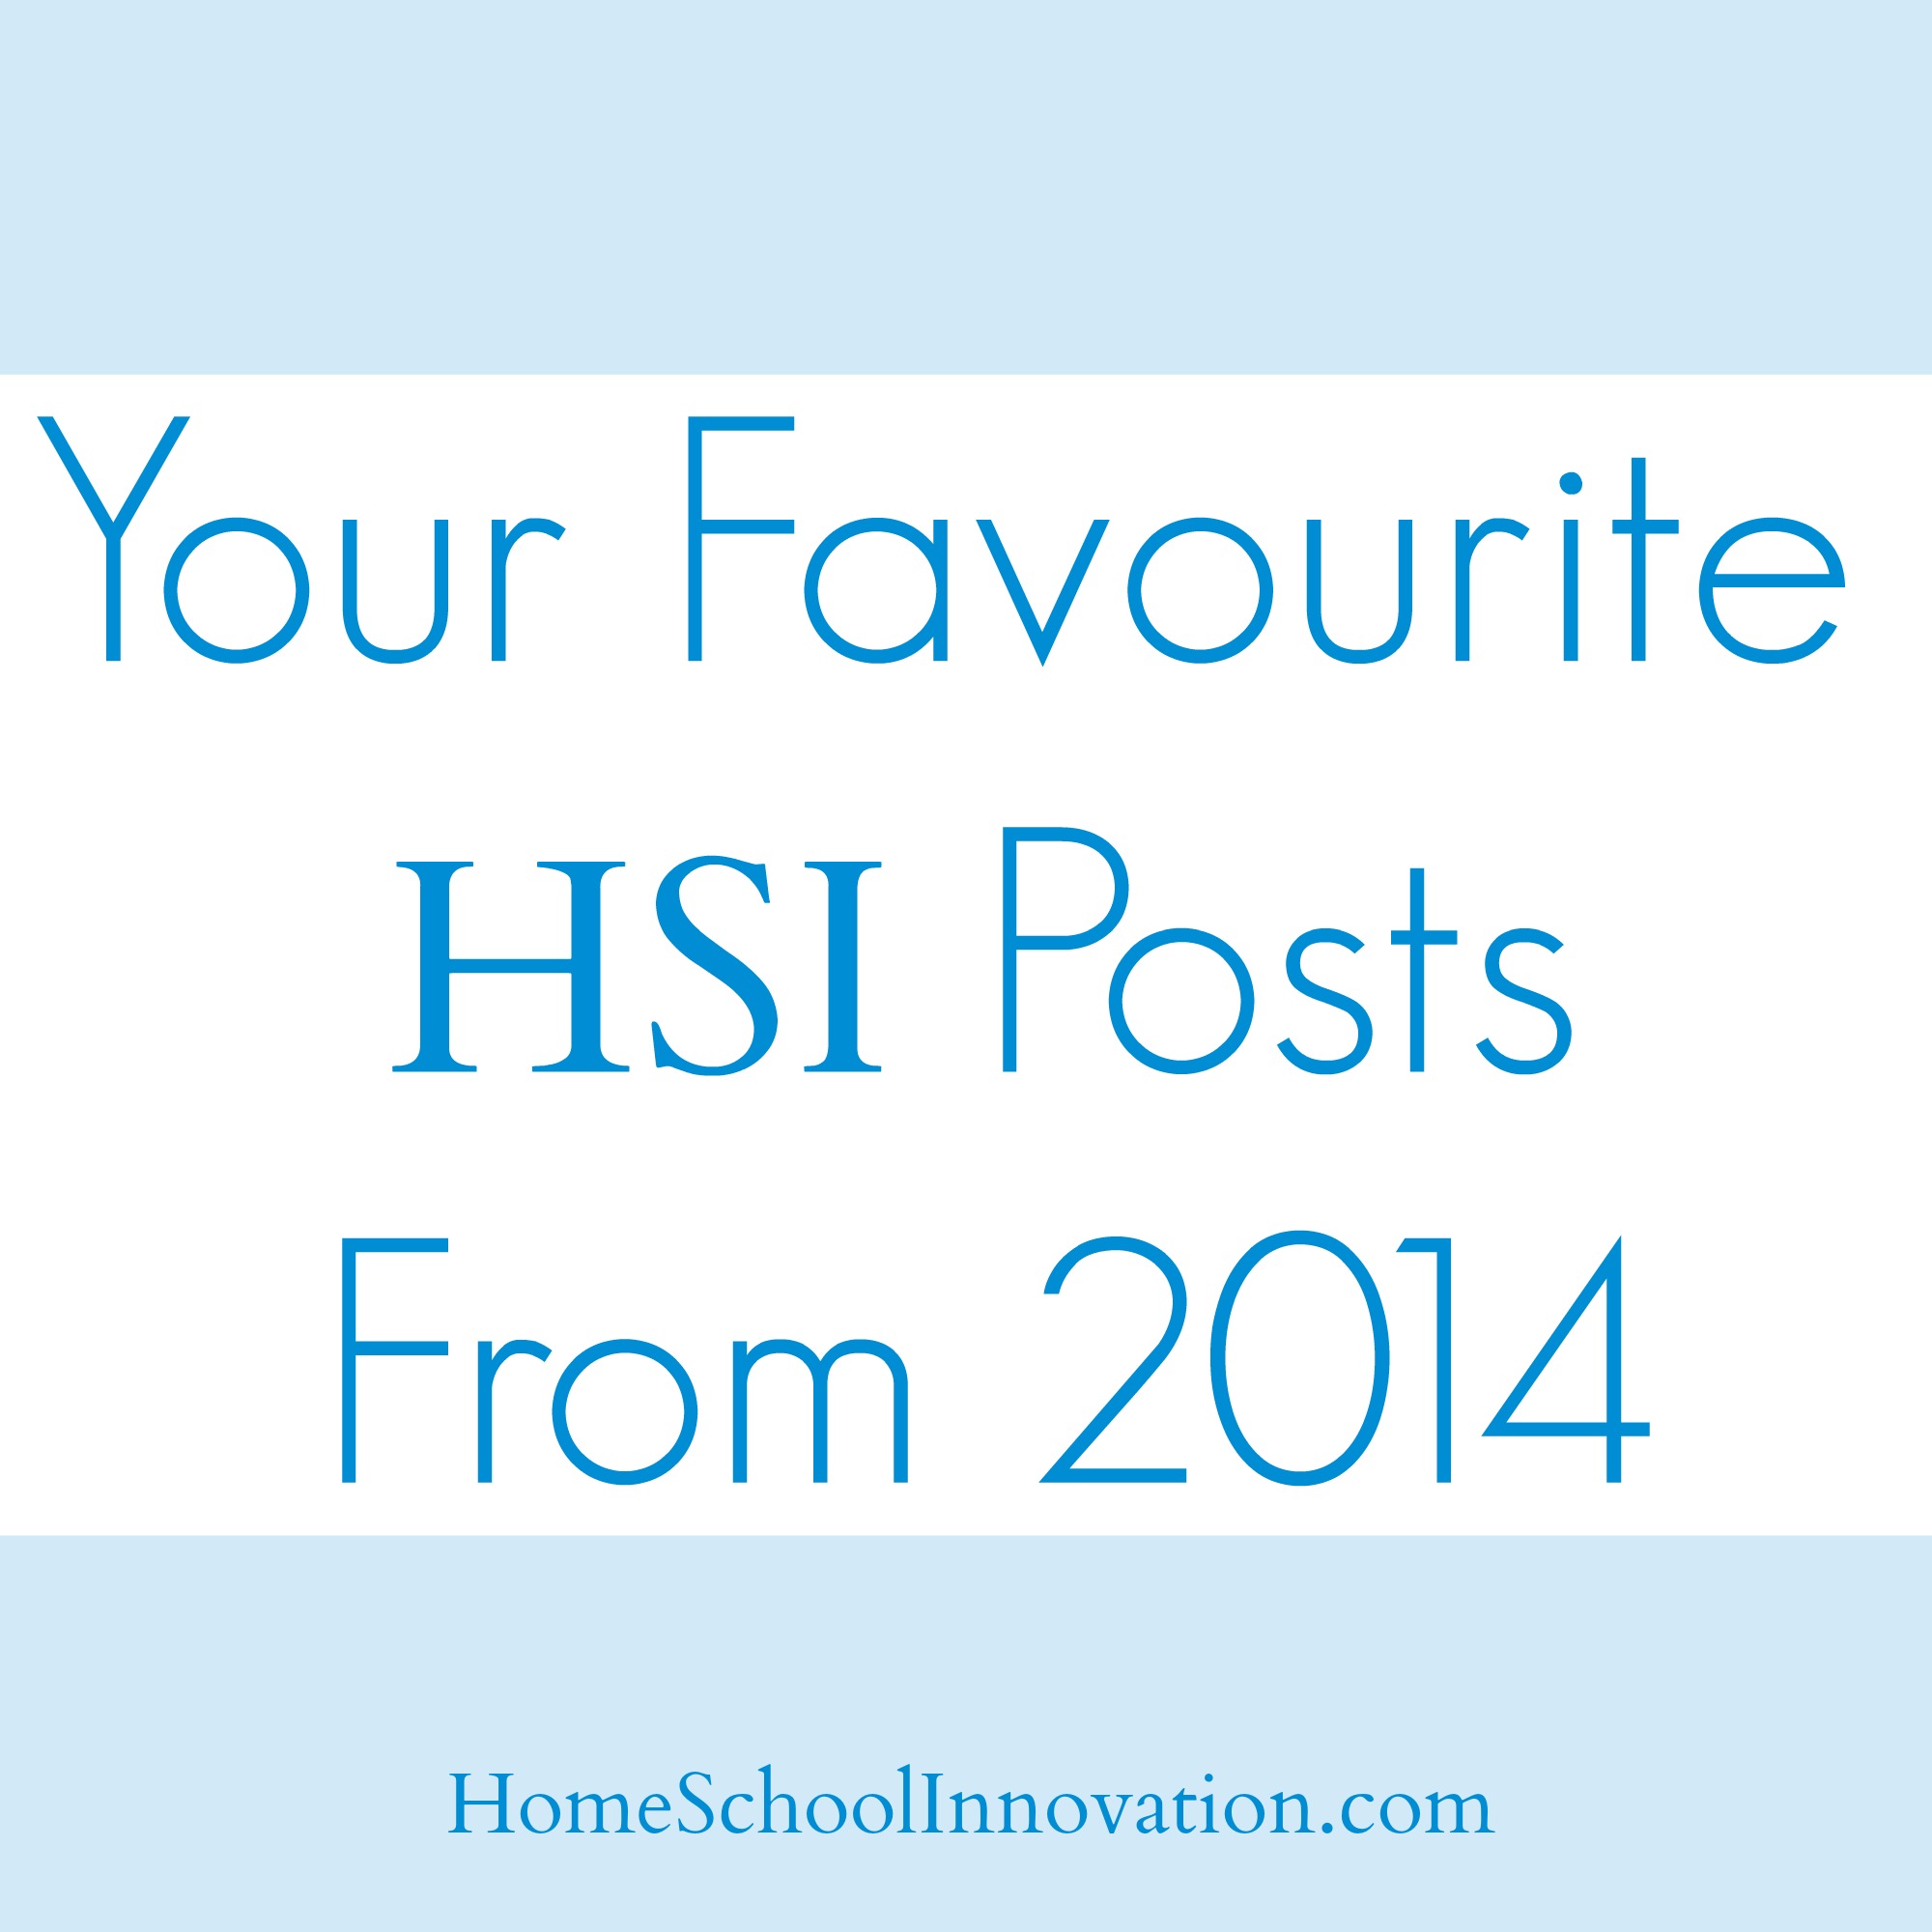 Your Favourite HSI Posts from 2014